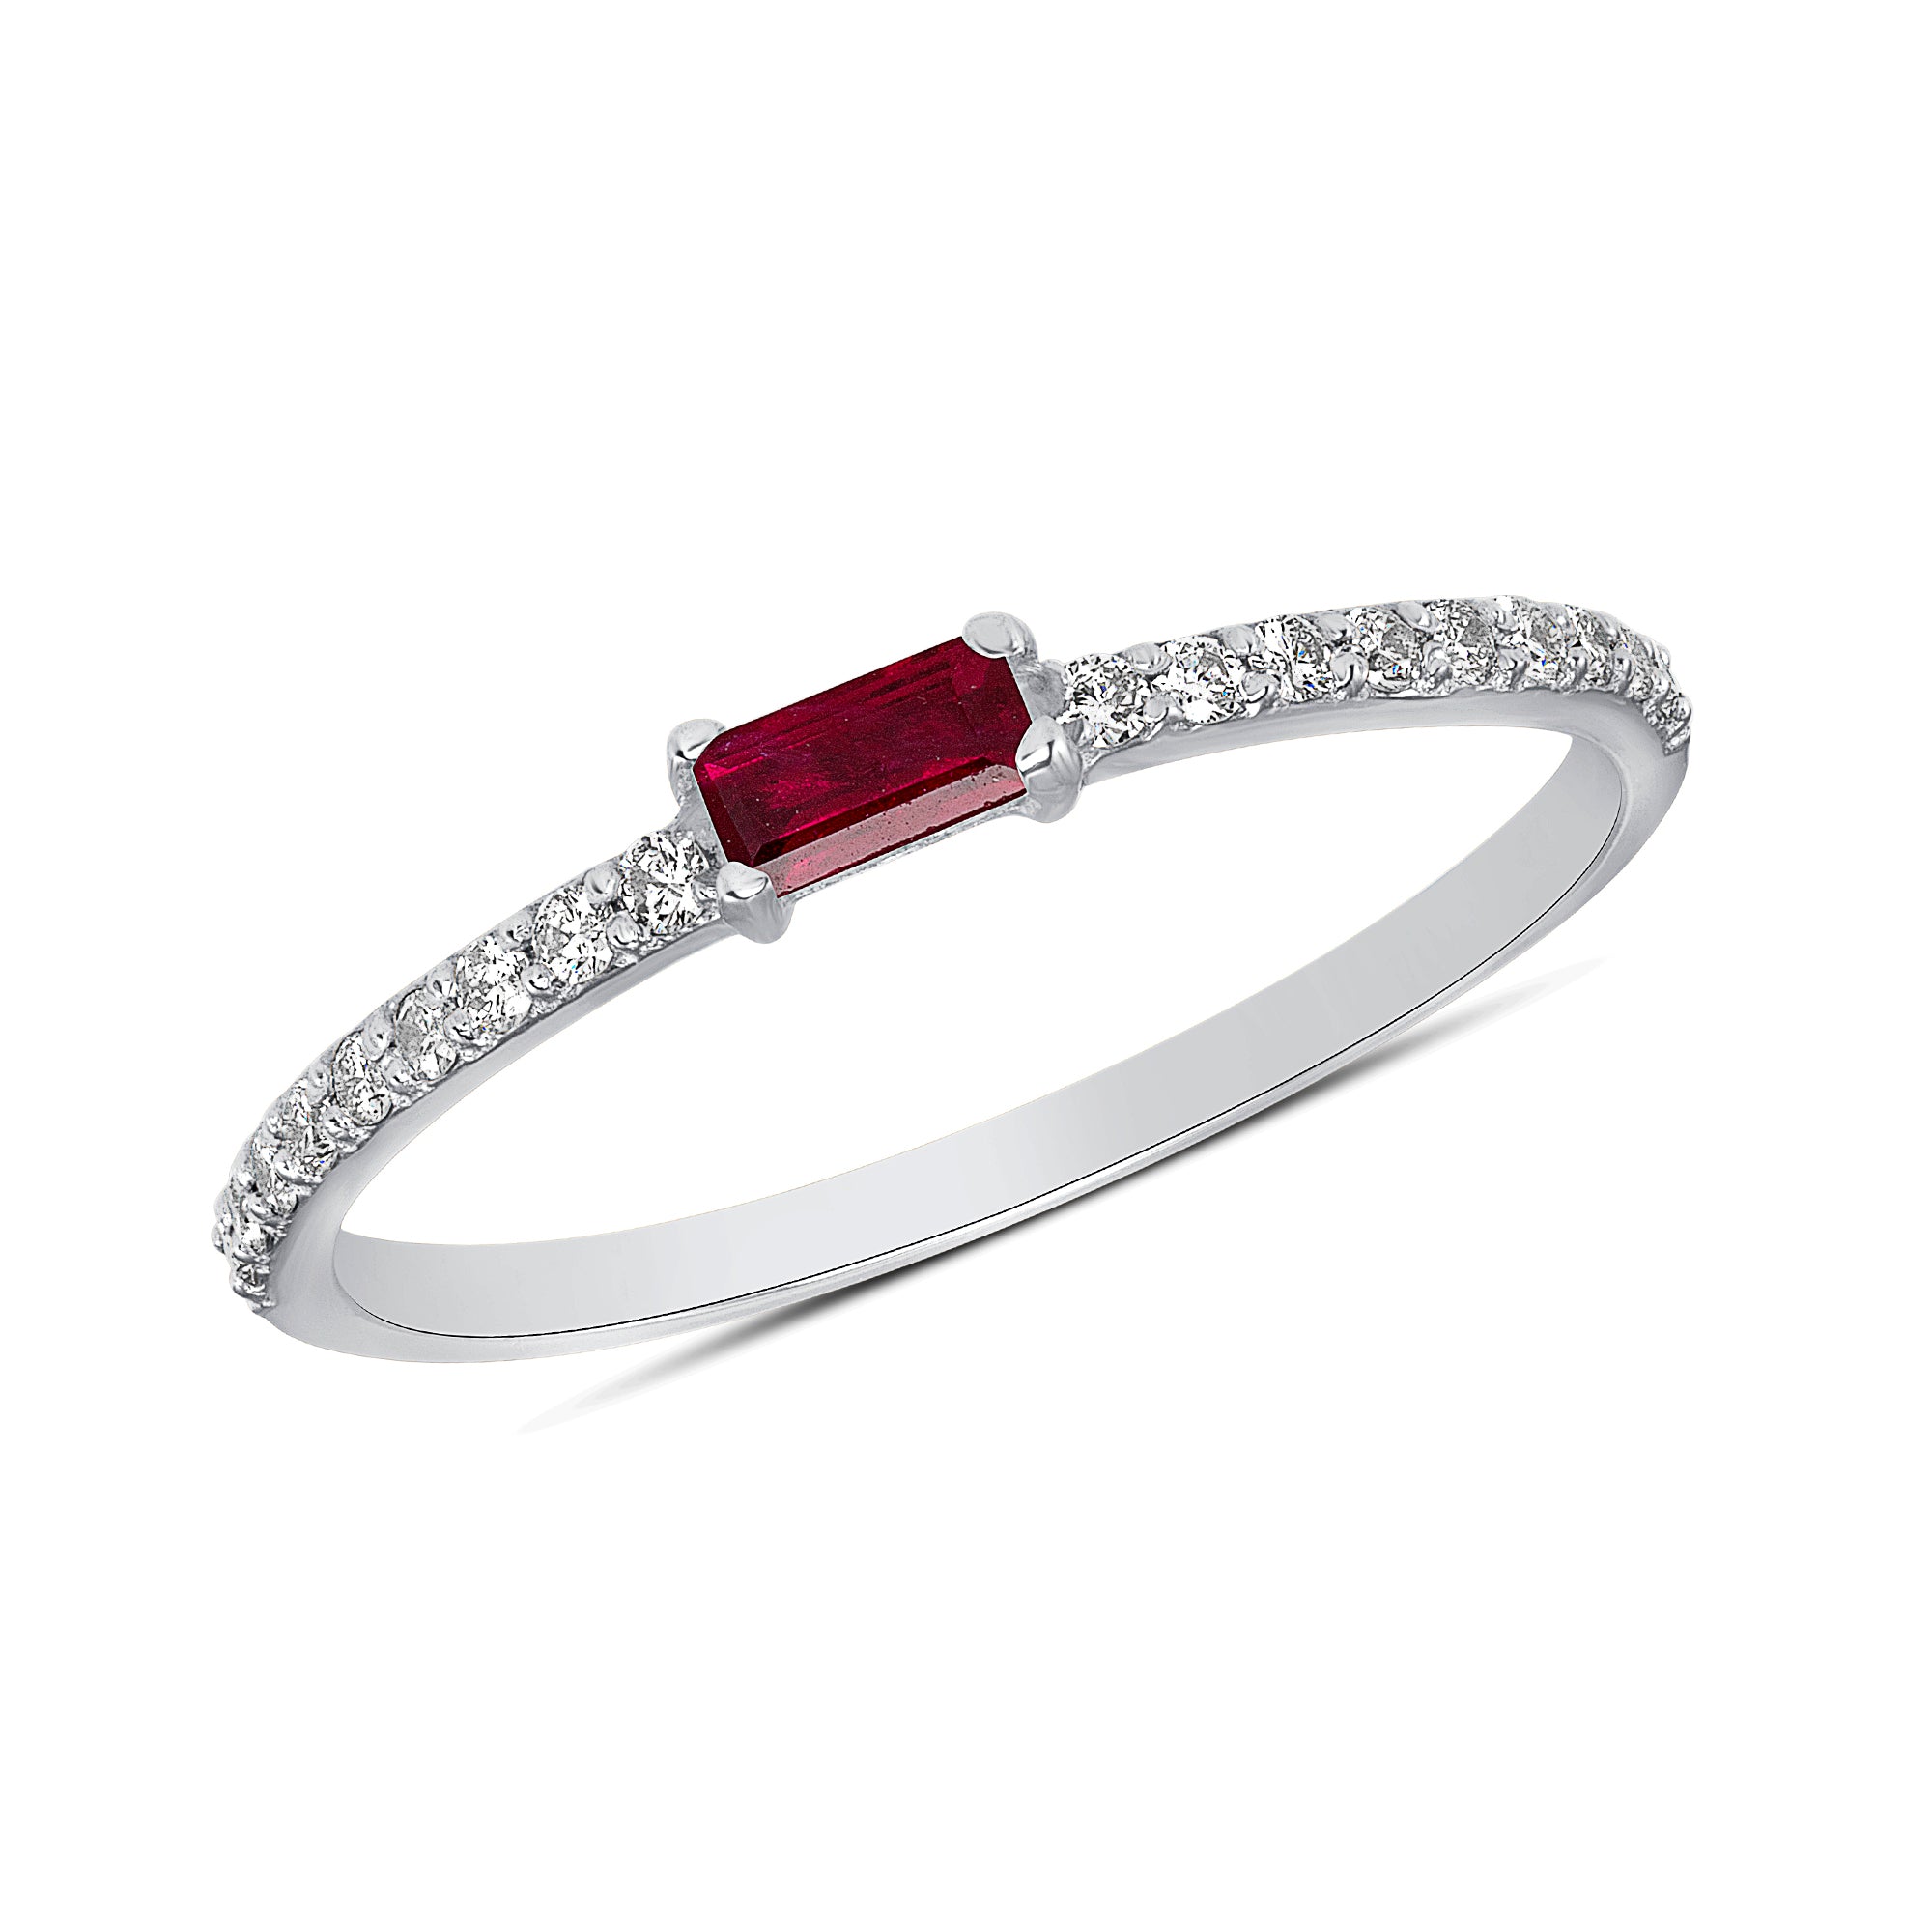 14K Gold Diamond & Ruby Baguette Stackable/Wedding Band. GGDB-107W-RUD,  Color Stones, Color Stones, Belarino